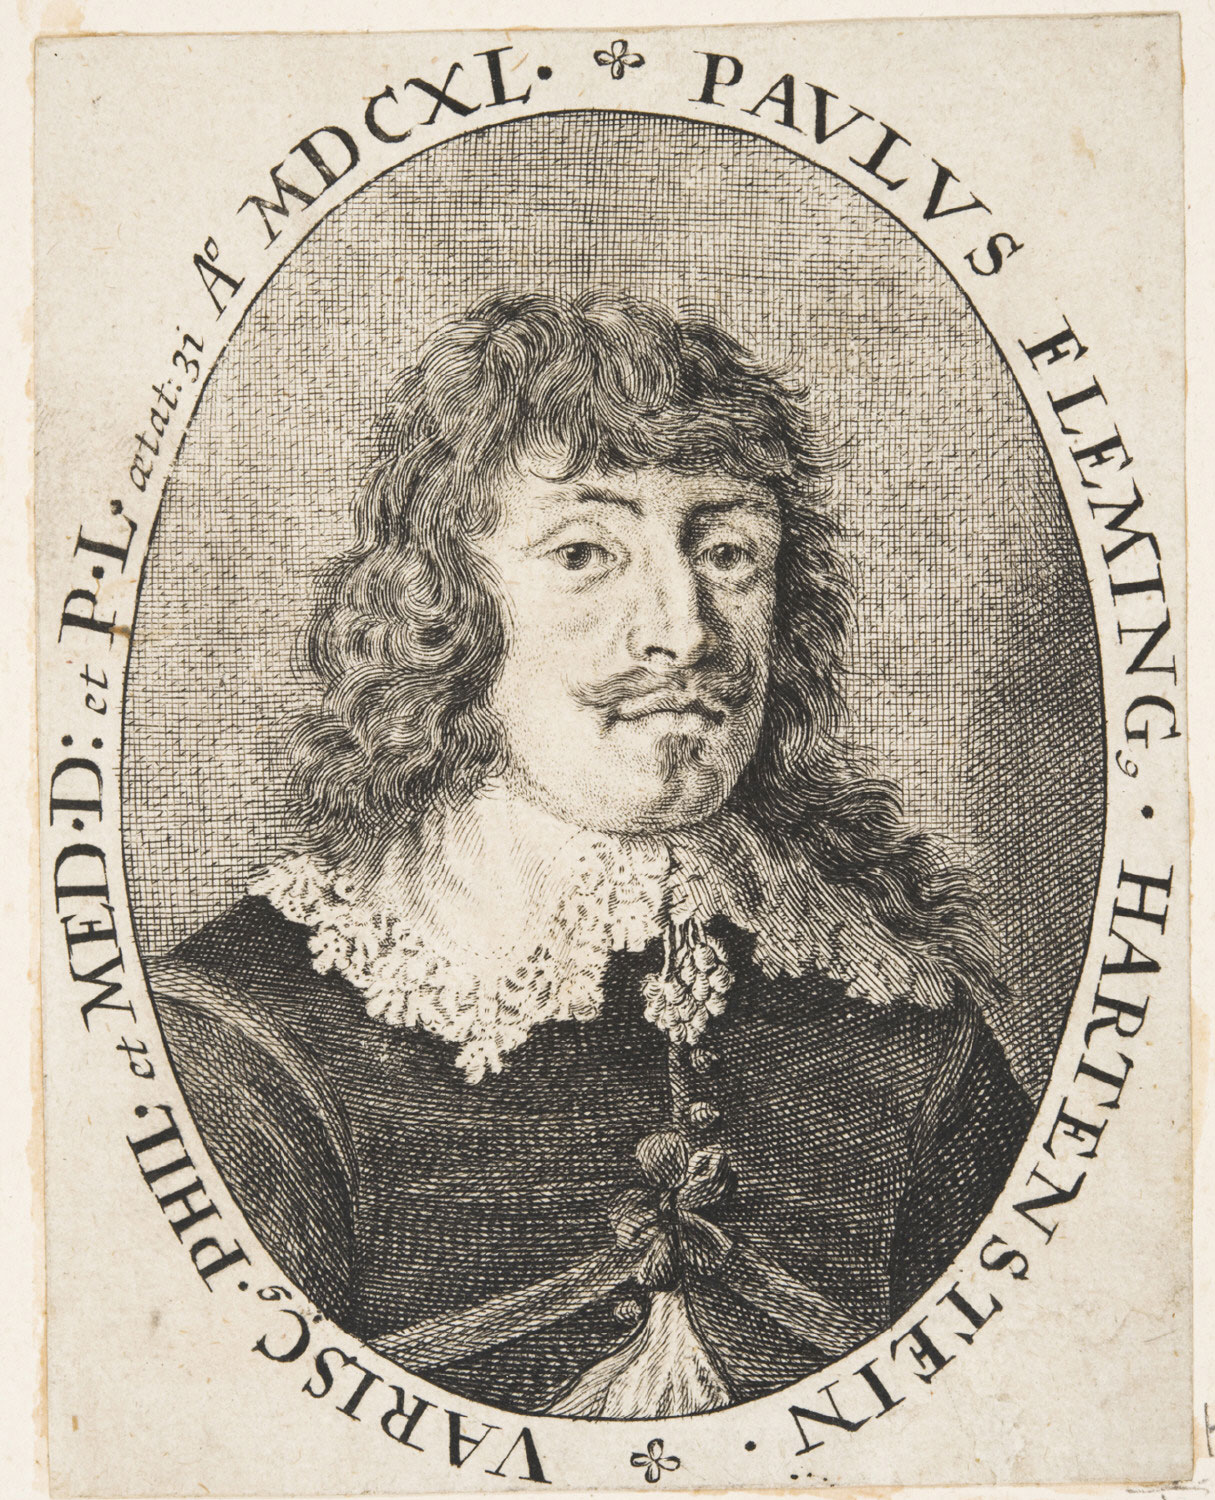 An oval portrait of a man wearing seventeenth-century clothes, including an elaborate lace collar. He wears his curly hair loose to his shoulders, with bangs, and he has a mustache twirled up at either end. An inscription runs around the oval to identify the sitter and the date.